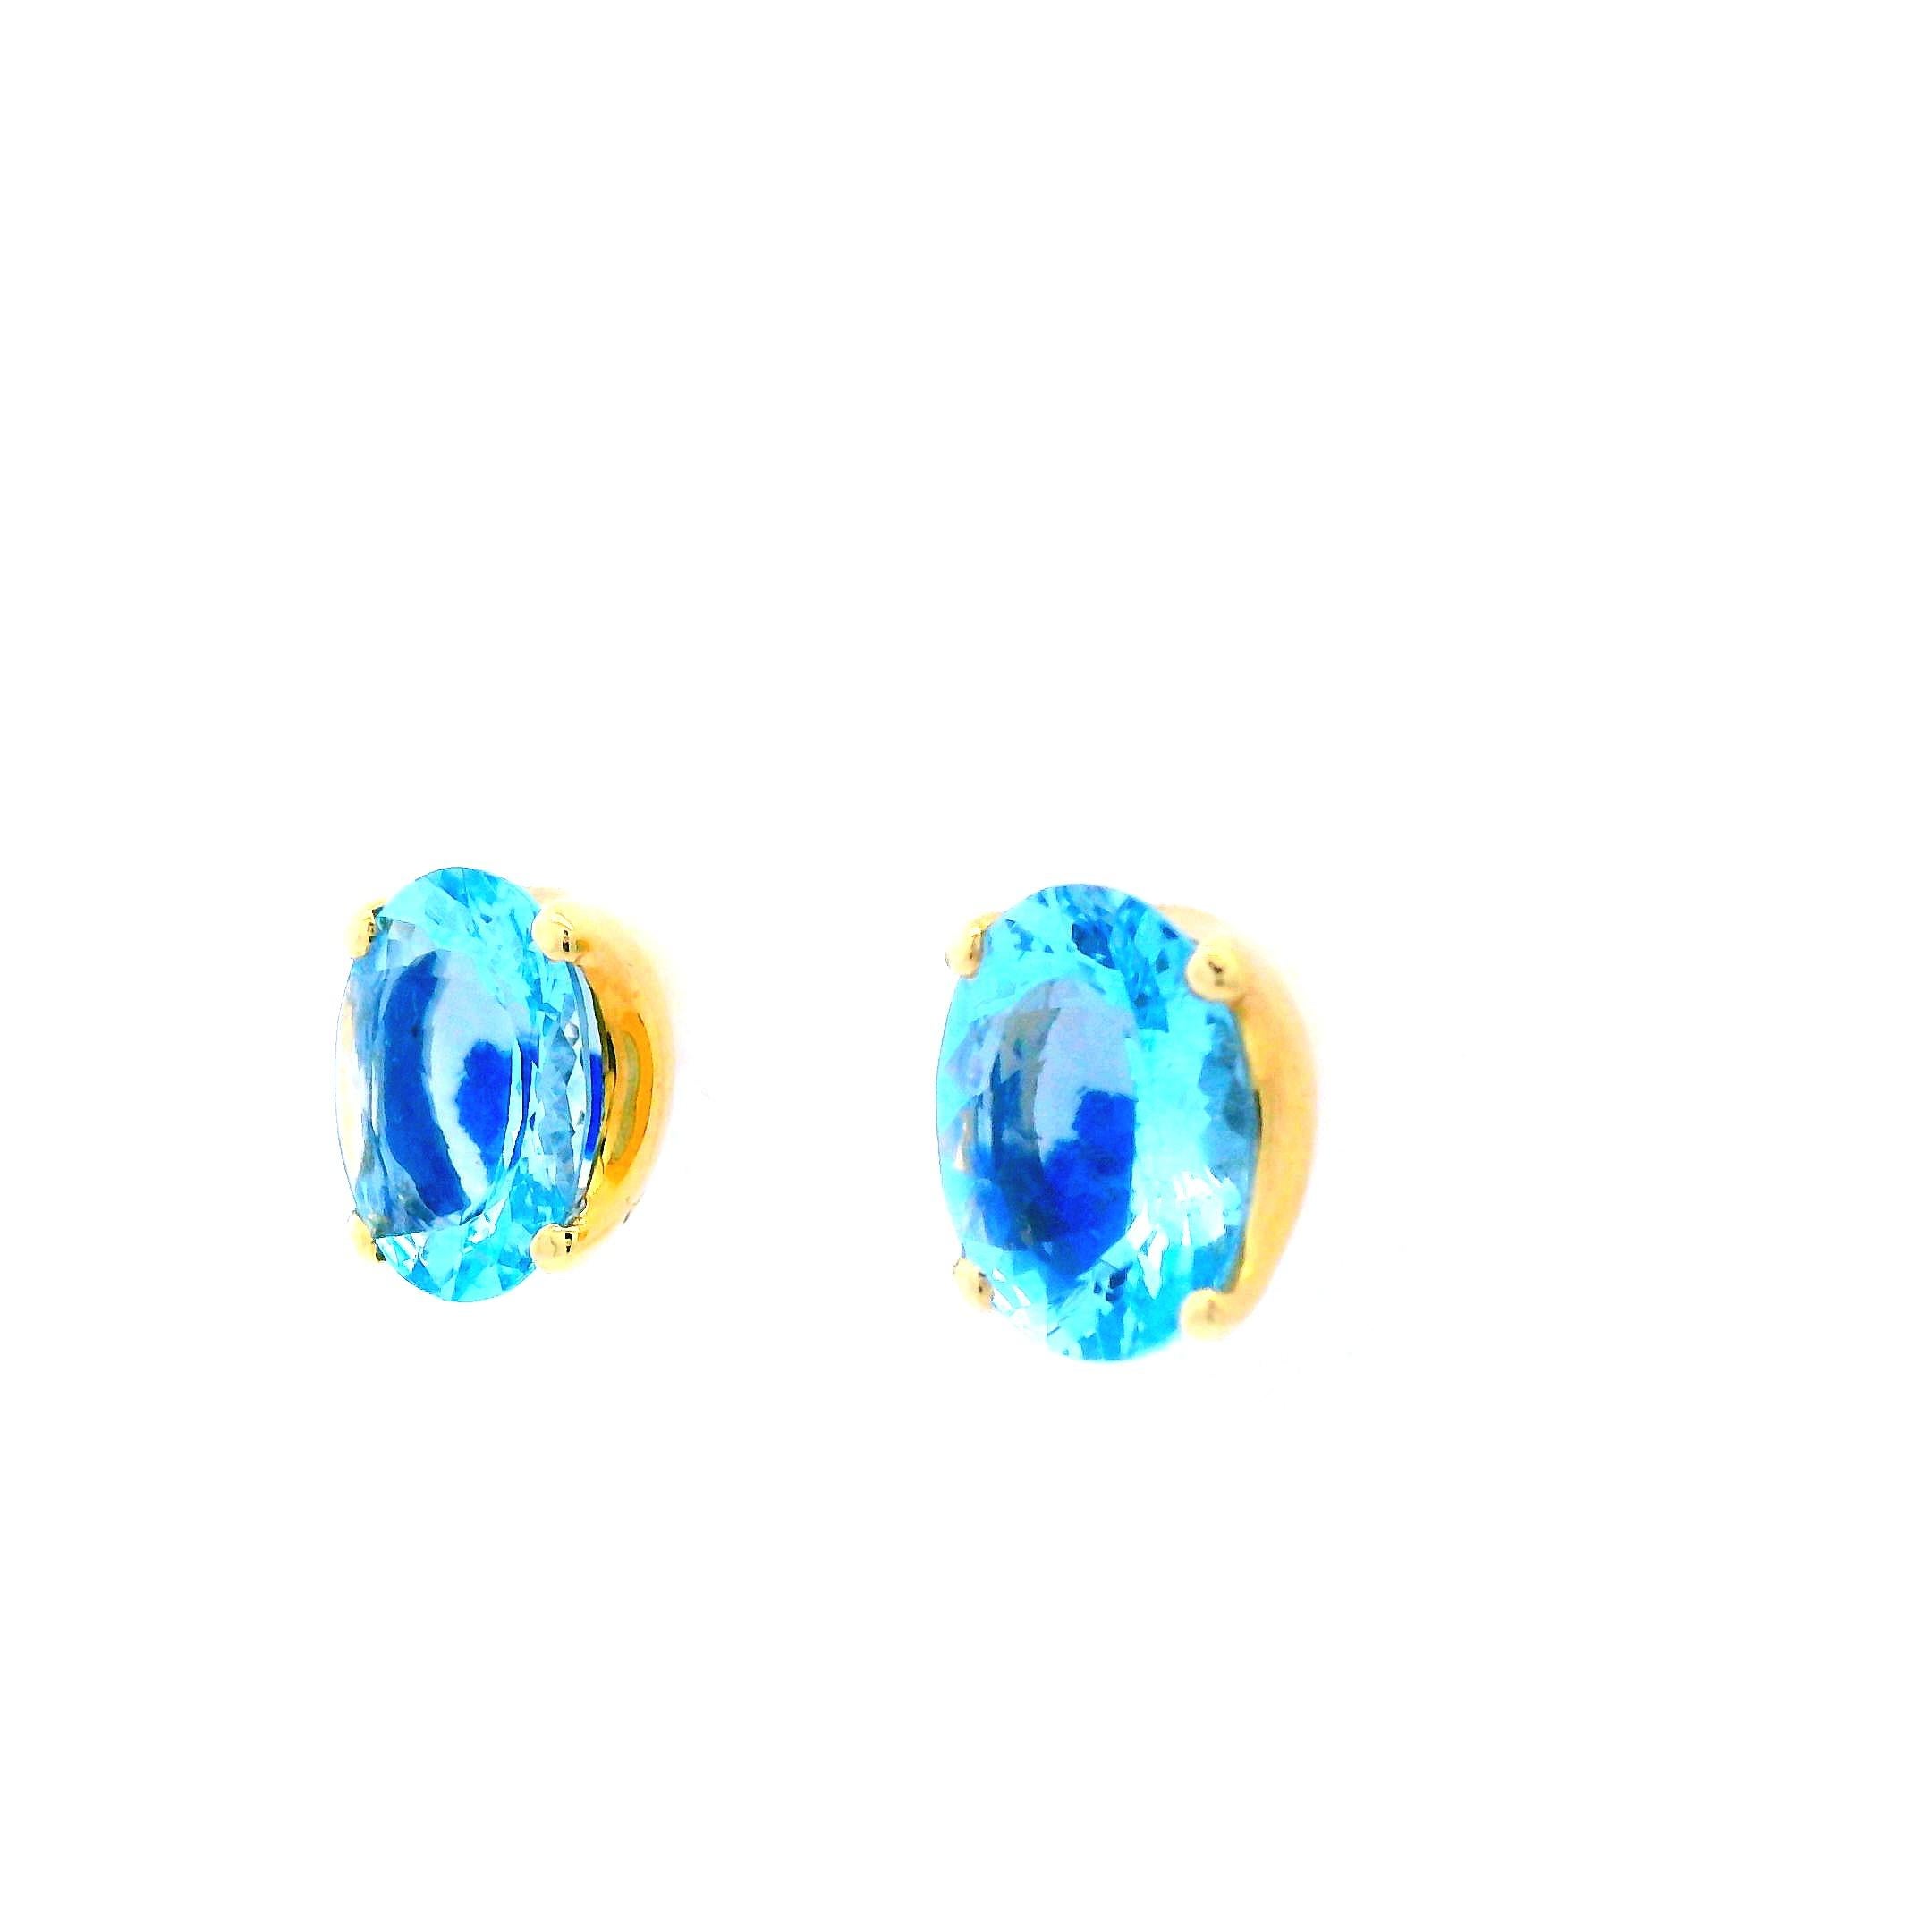 This beautiful pair of earrings is a pair of H. Stern 18k yellow gold aquamarine stud earrings. These fine earrings have two oval cut aquamarines, each set with a four-prong 18k yellow gold setting. The subtle hint of the 18k yellow gold over the